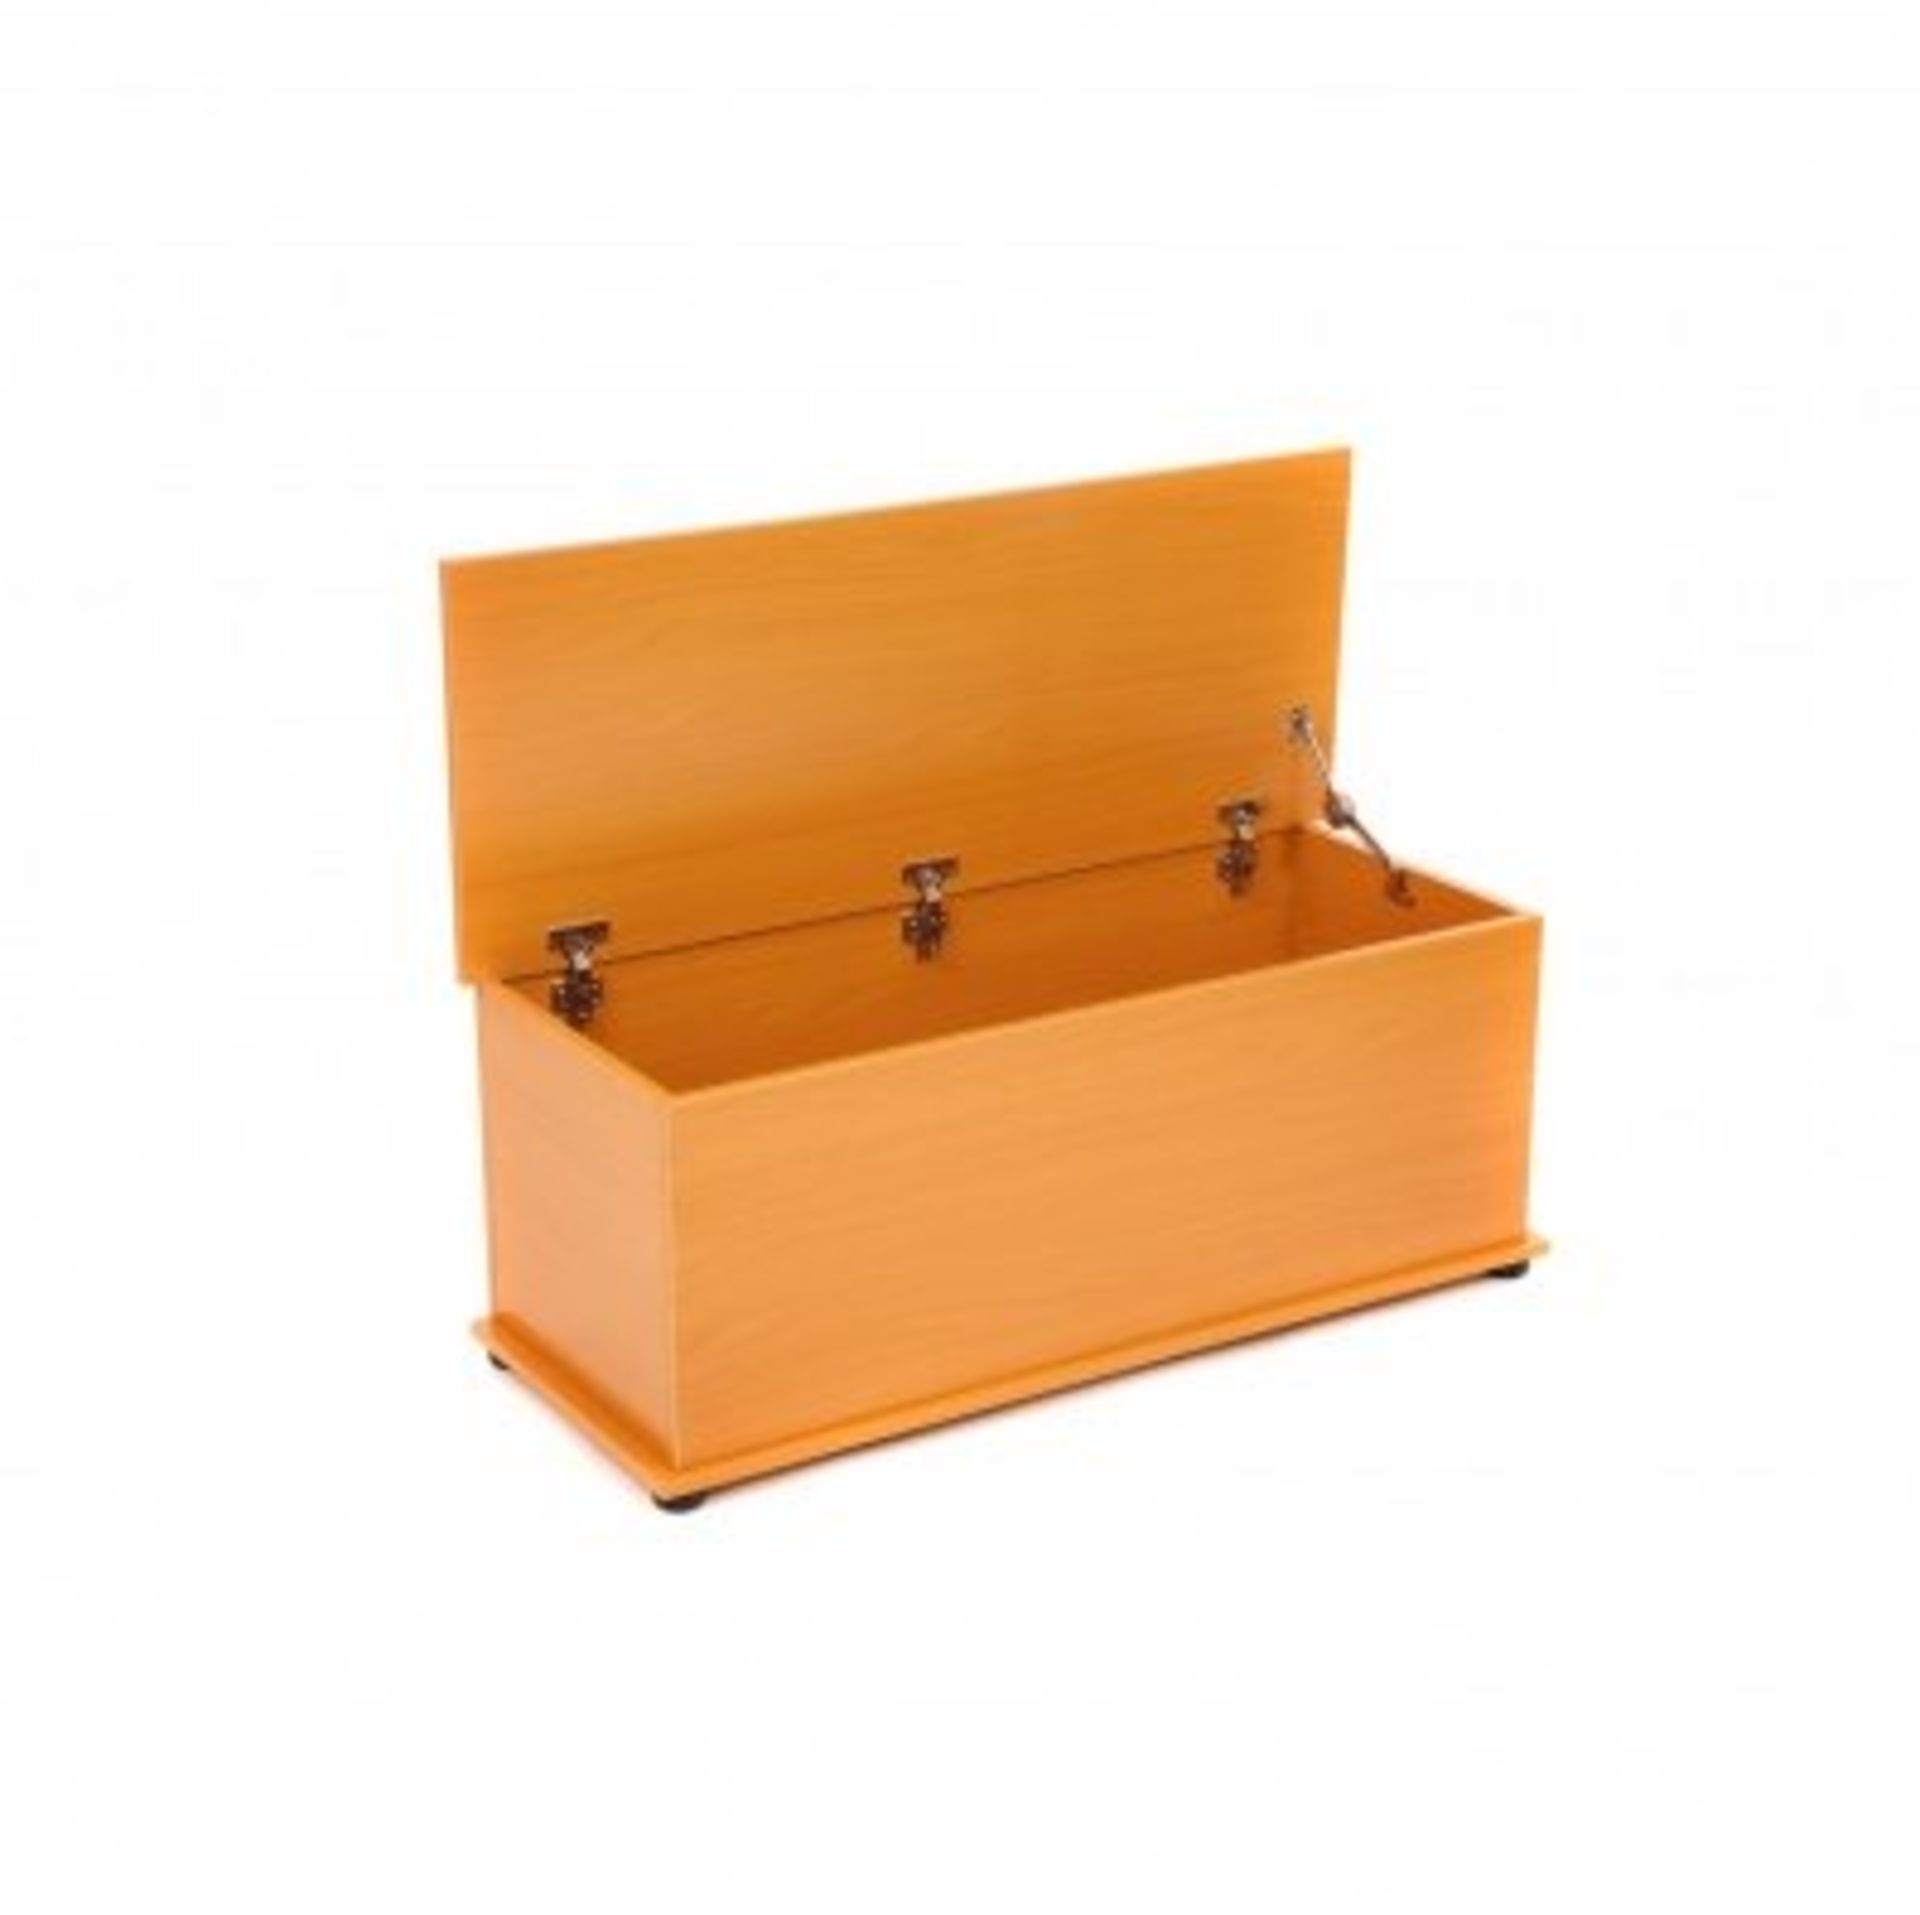 (LF25) Beech Wooden Storage Chest Ottoman Blanket Box Toy Chest Trunk The storage chest is... - Image 2 of 2